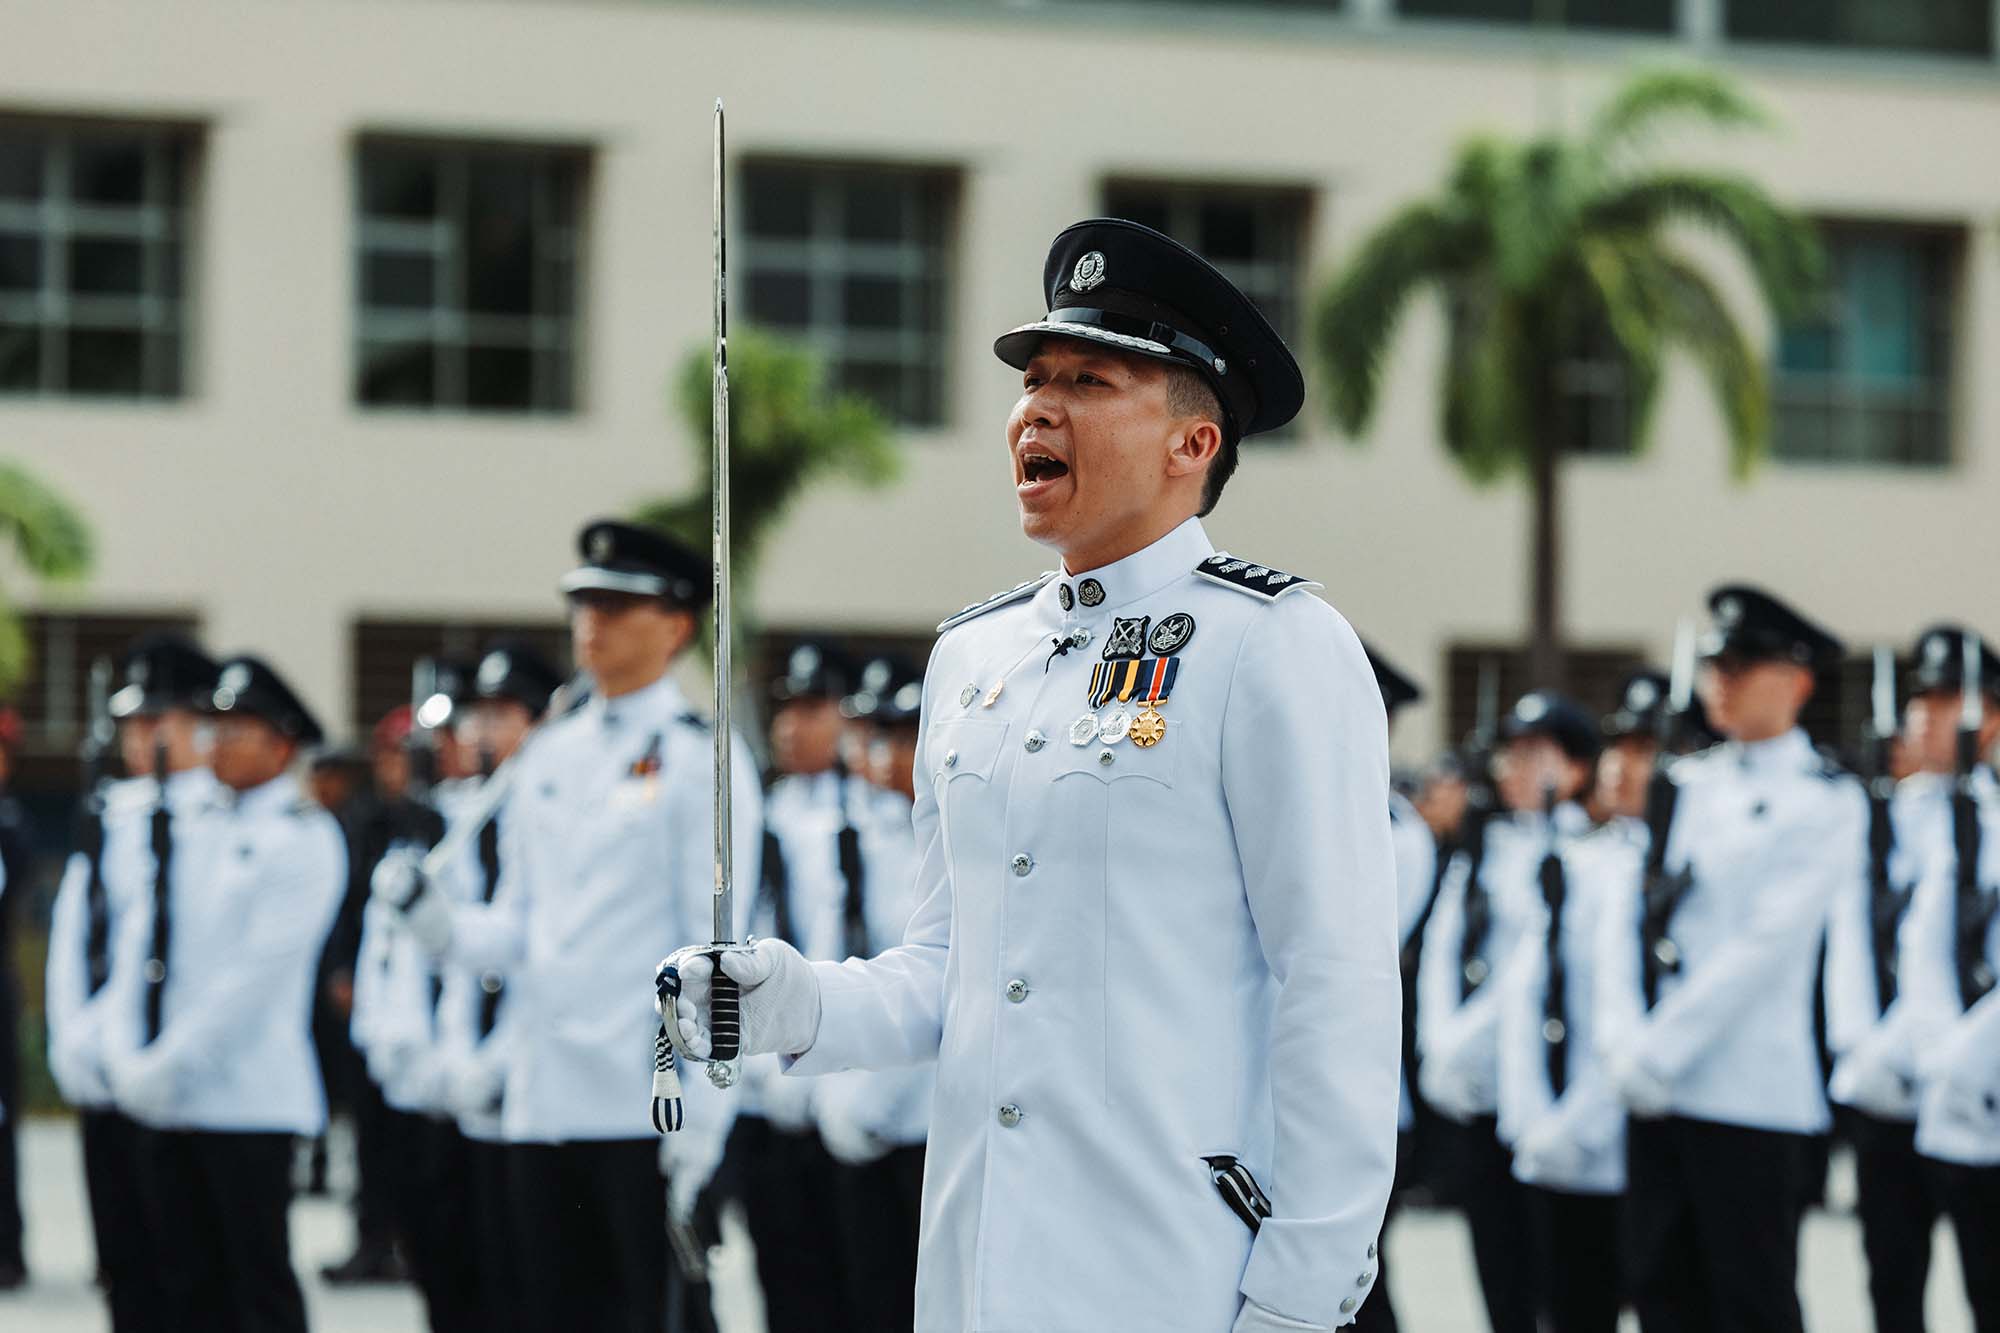 Supt Koh’s wish is for the Parade to unite all officers in celebrating the SPF’s rich heritage and to fortify a sense of pride.